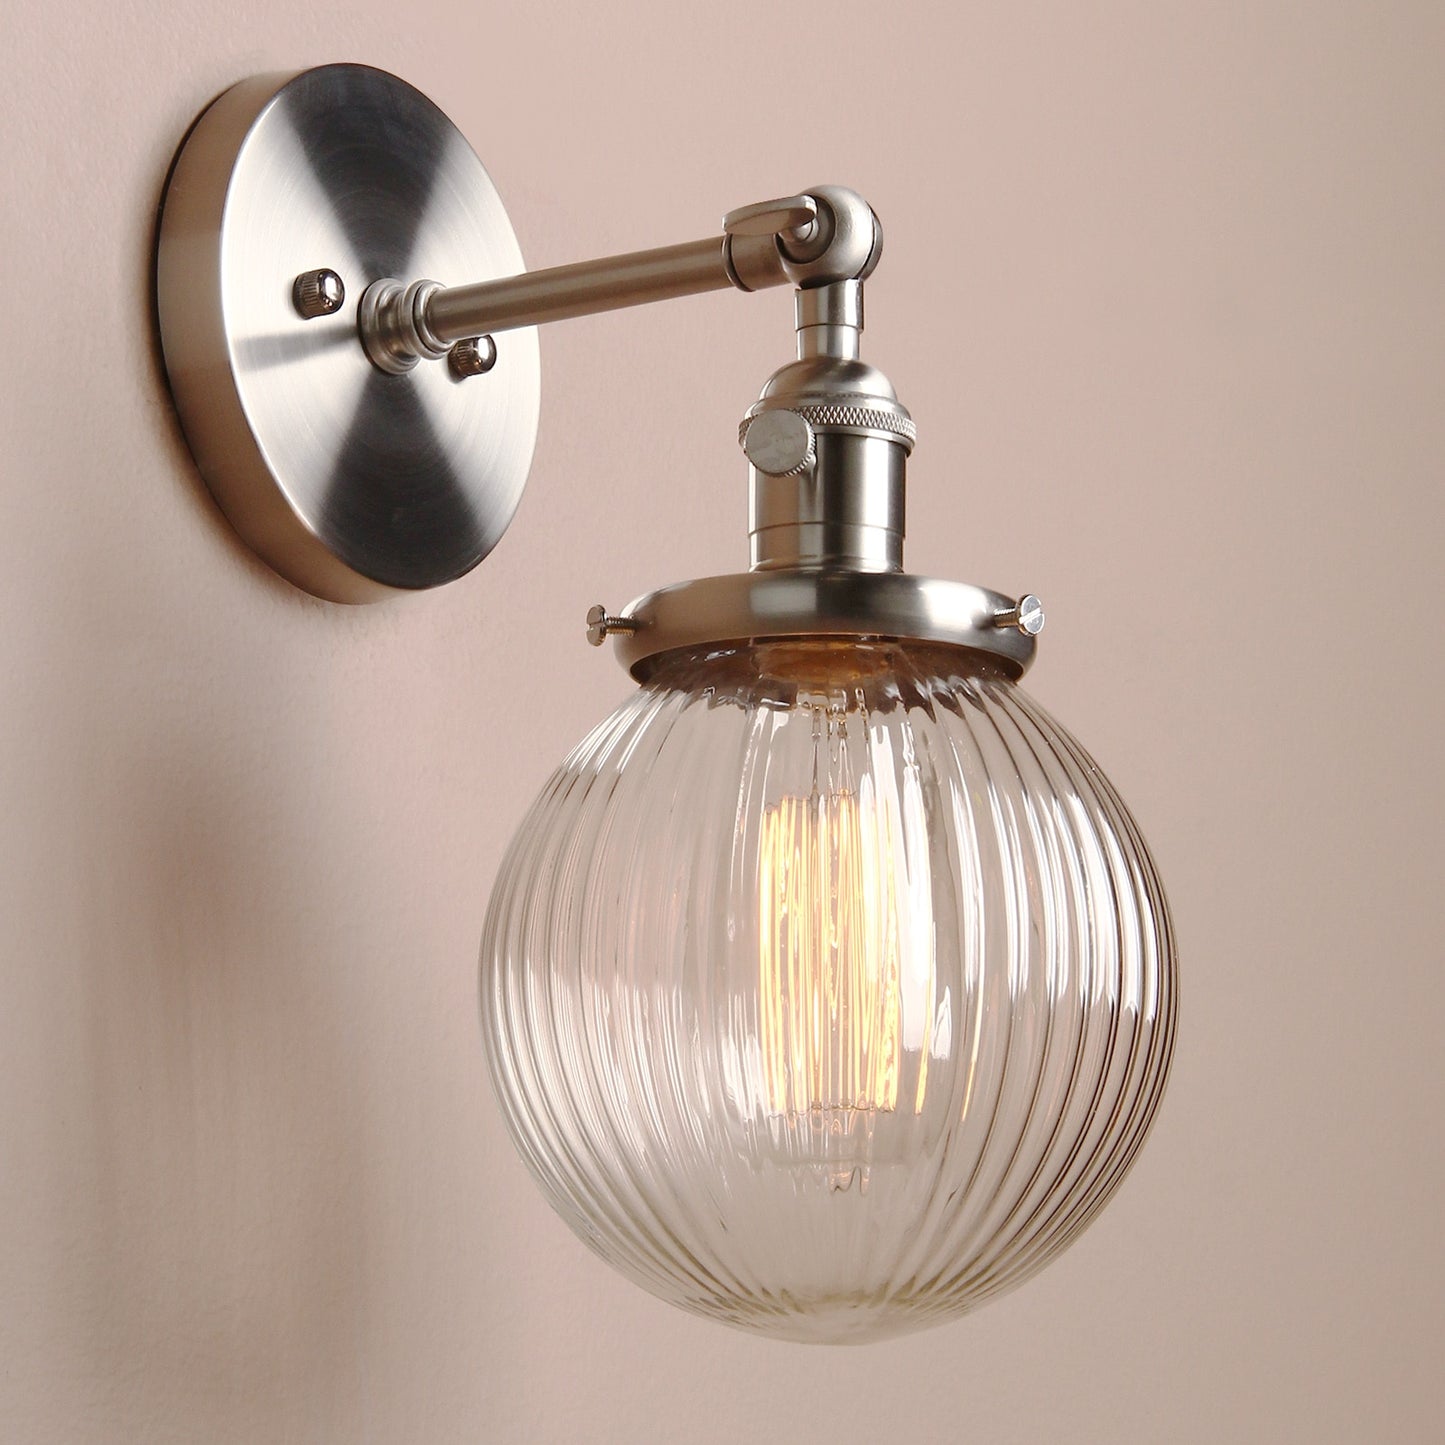 Farmhouse wall sconce with ribbed clear glass globe shown in brushed nickel hardware